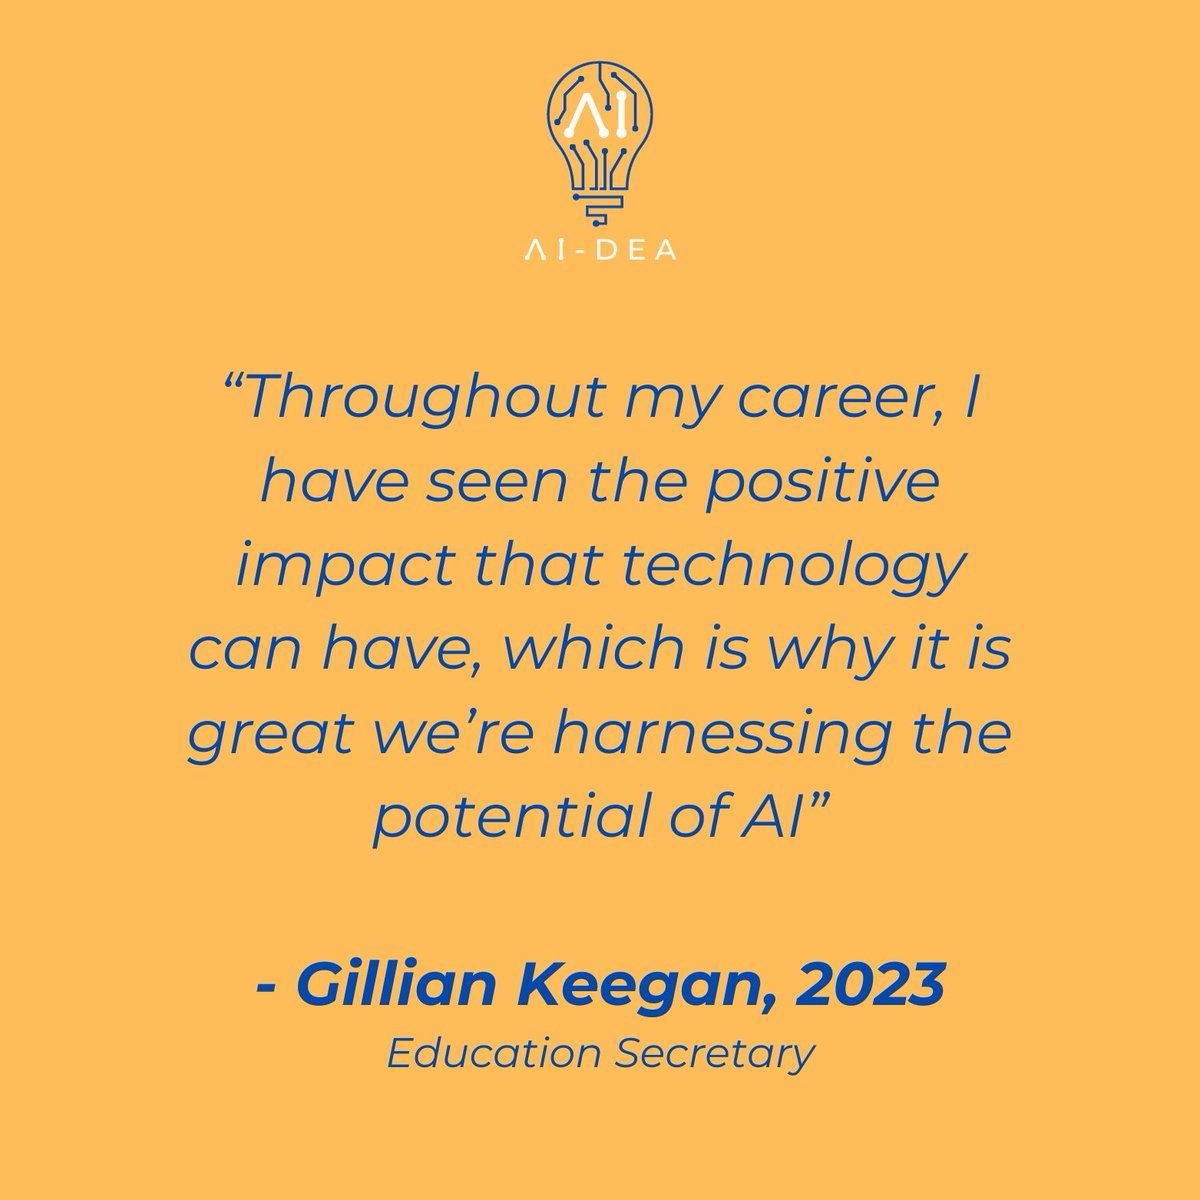 “Throughout my career, have seen the positive impact that technology can have, which is why it is great we're harnessing the potential of Al”

Gillian Keegan, 2023
Education Secretary

#aidea #ai #artificialintelligence #aiclassroom #aiteaching #ailearning